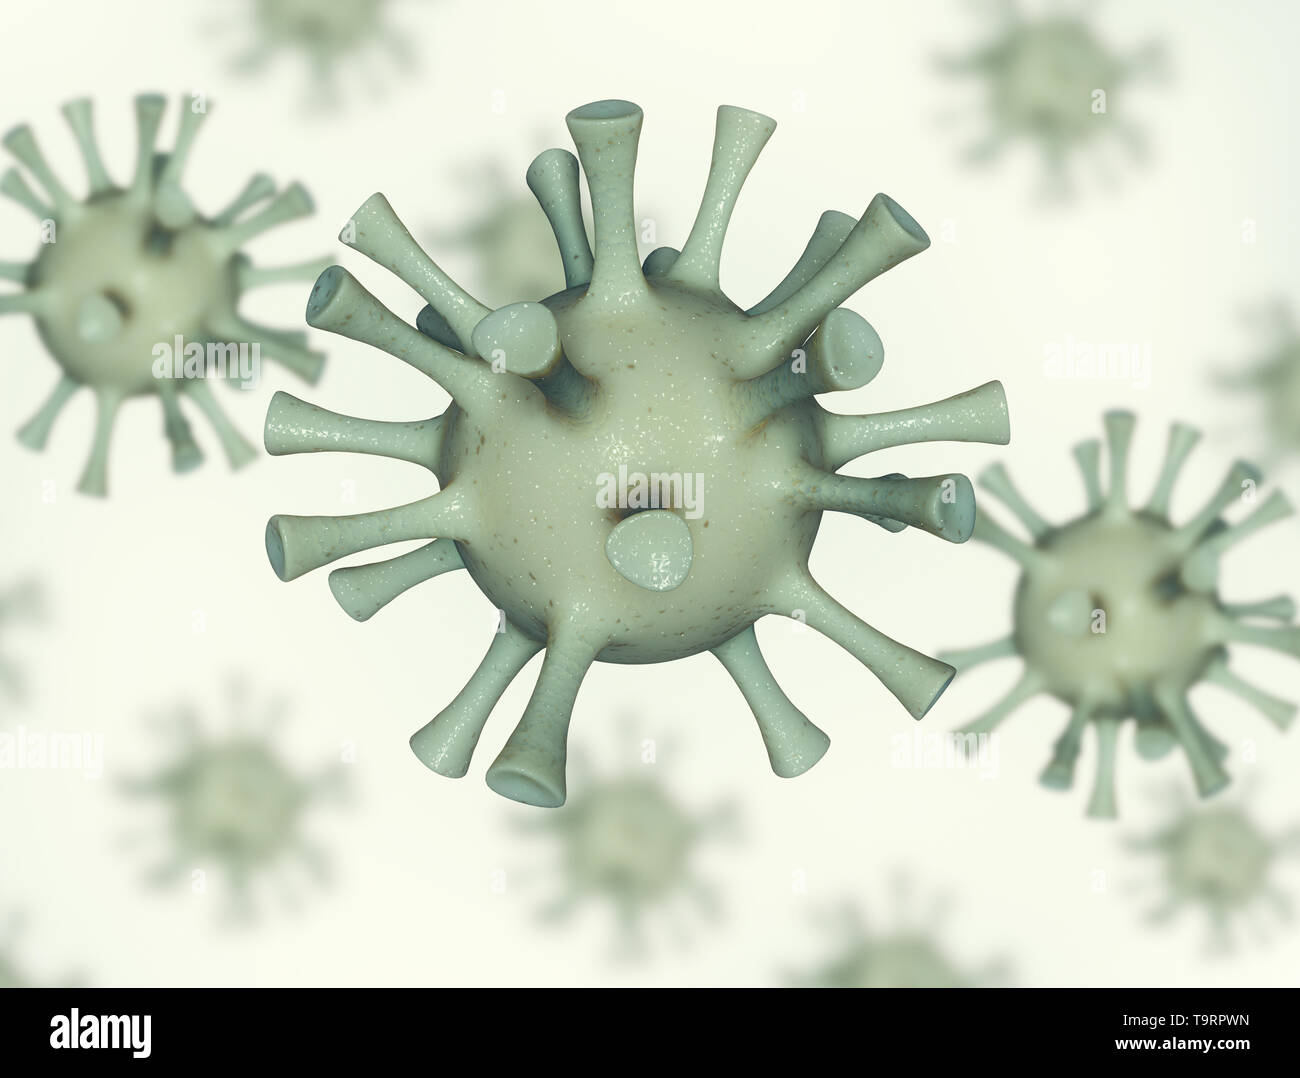 Virus cells in infected organism.3D illustration Stock Photo